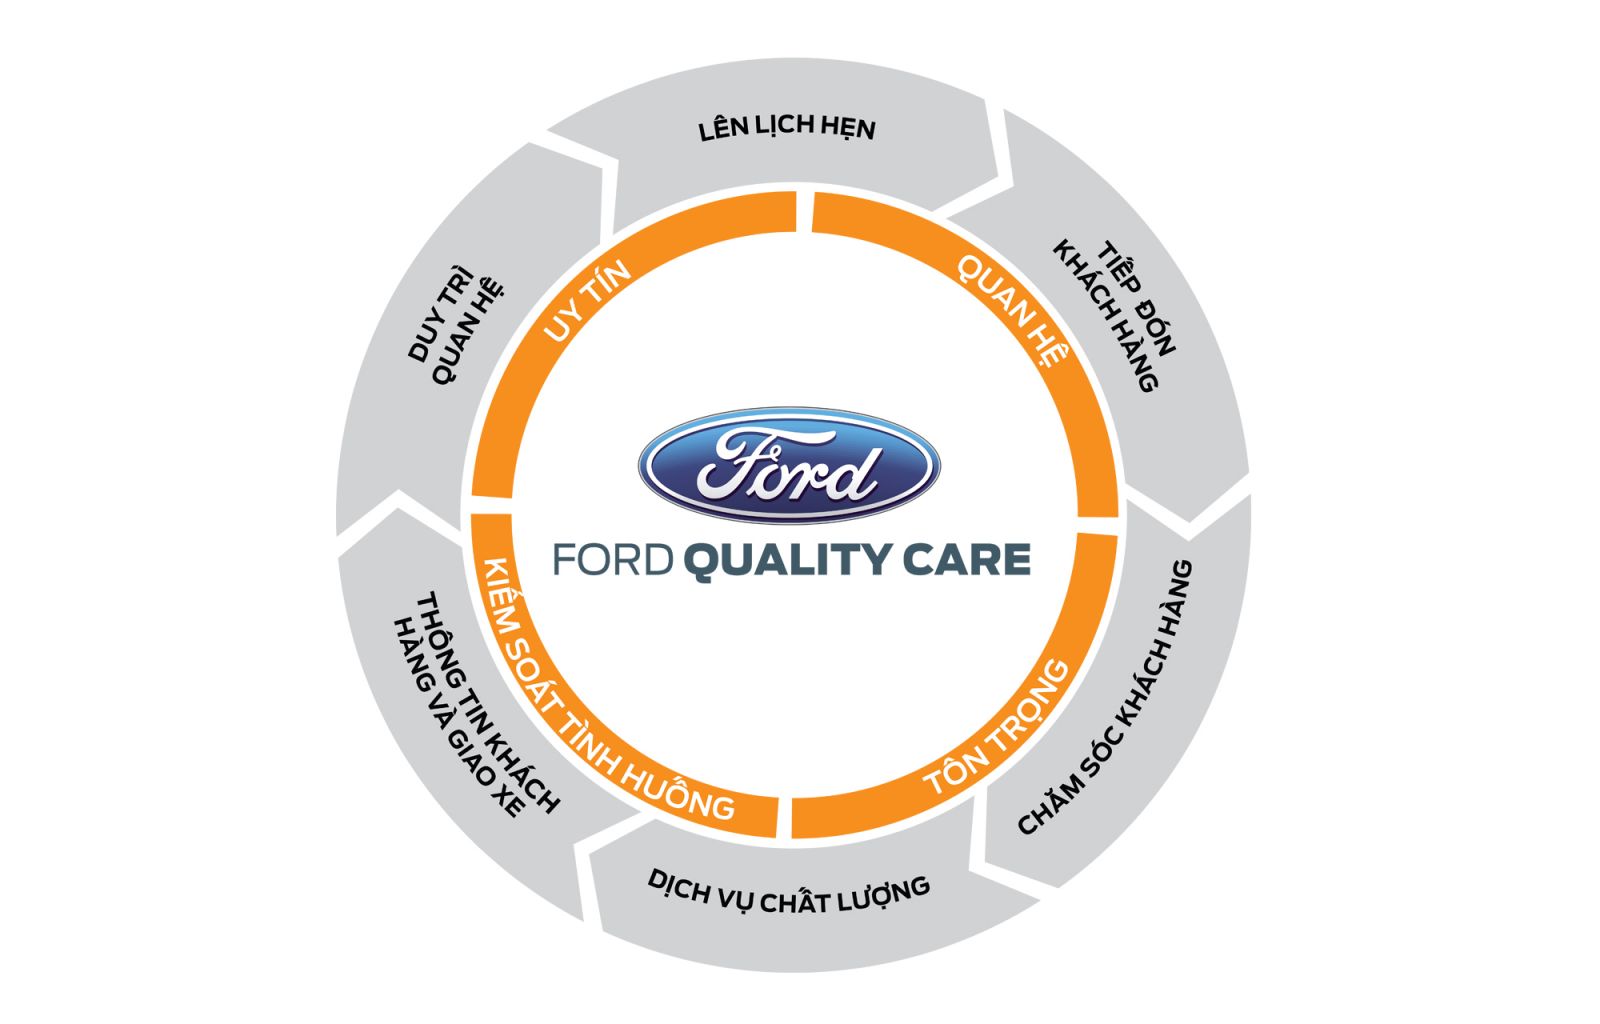 Ford quality care